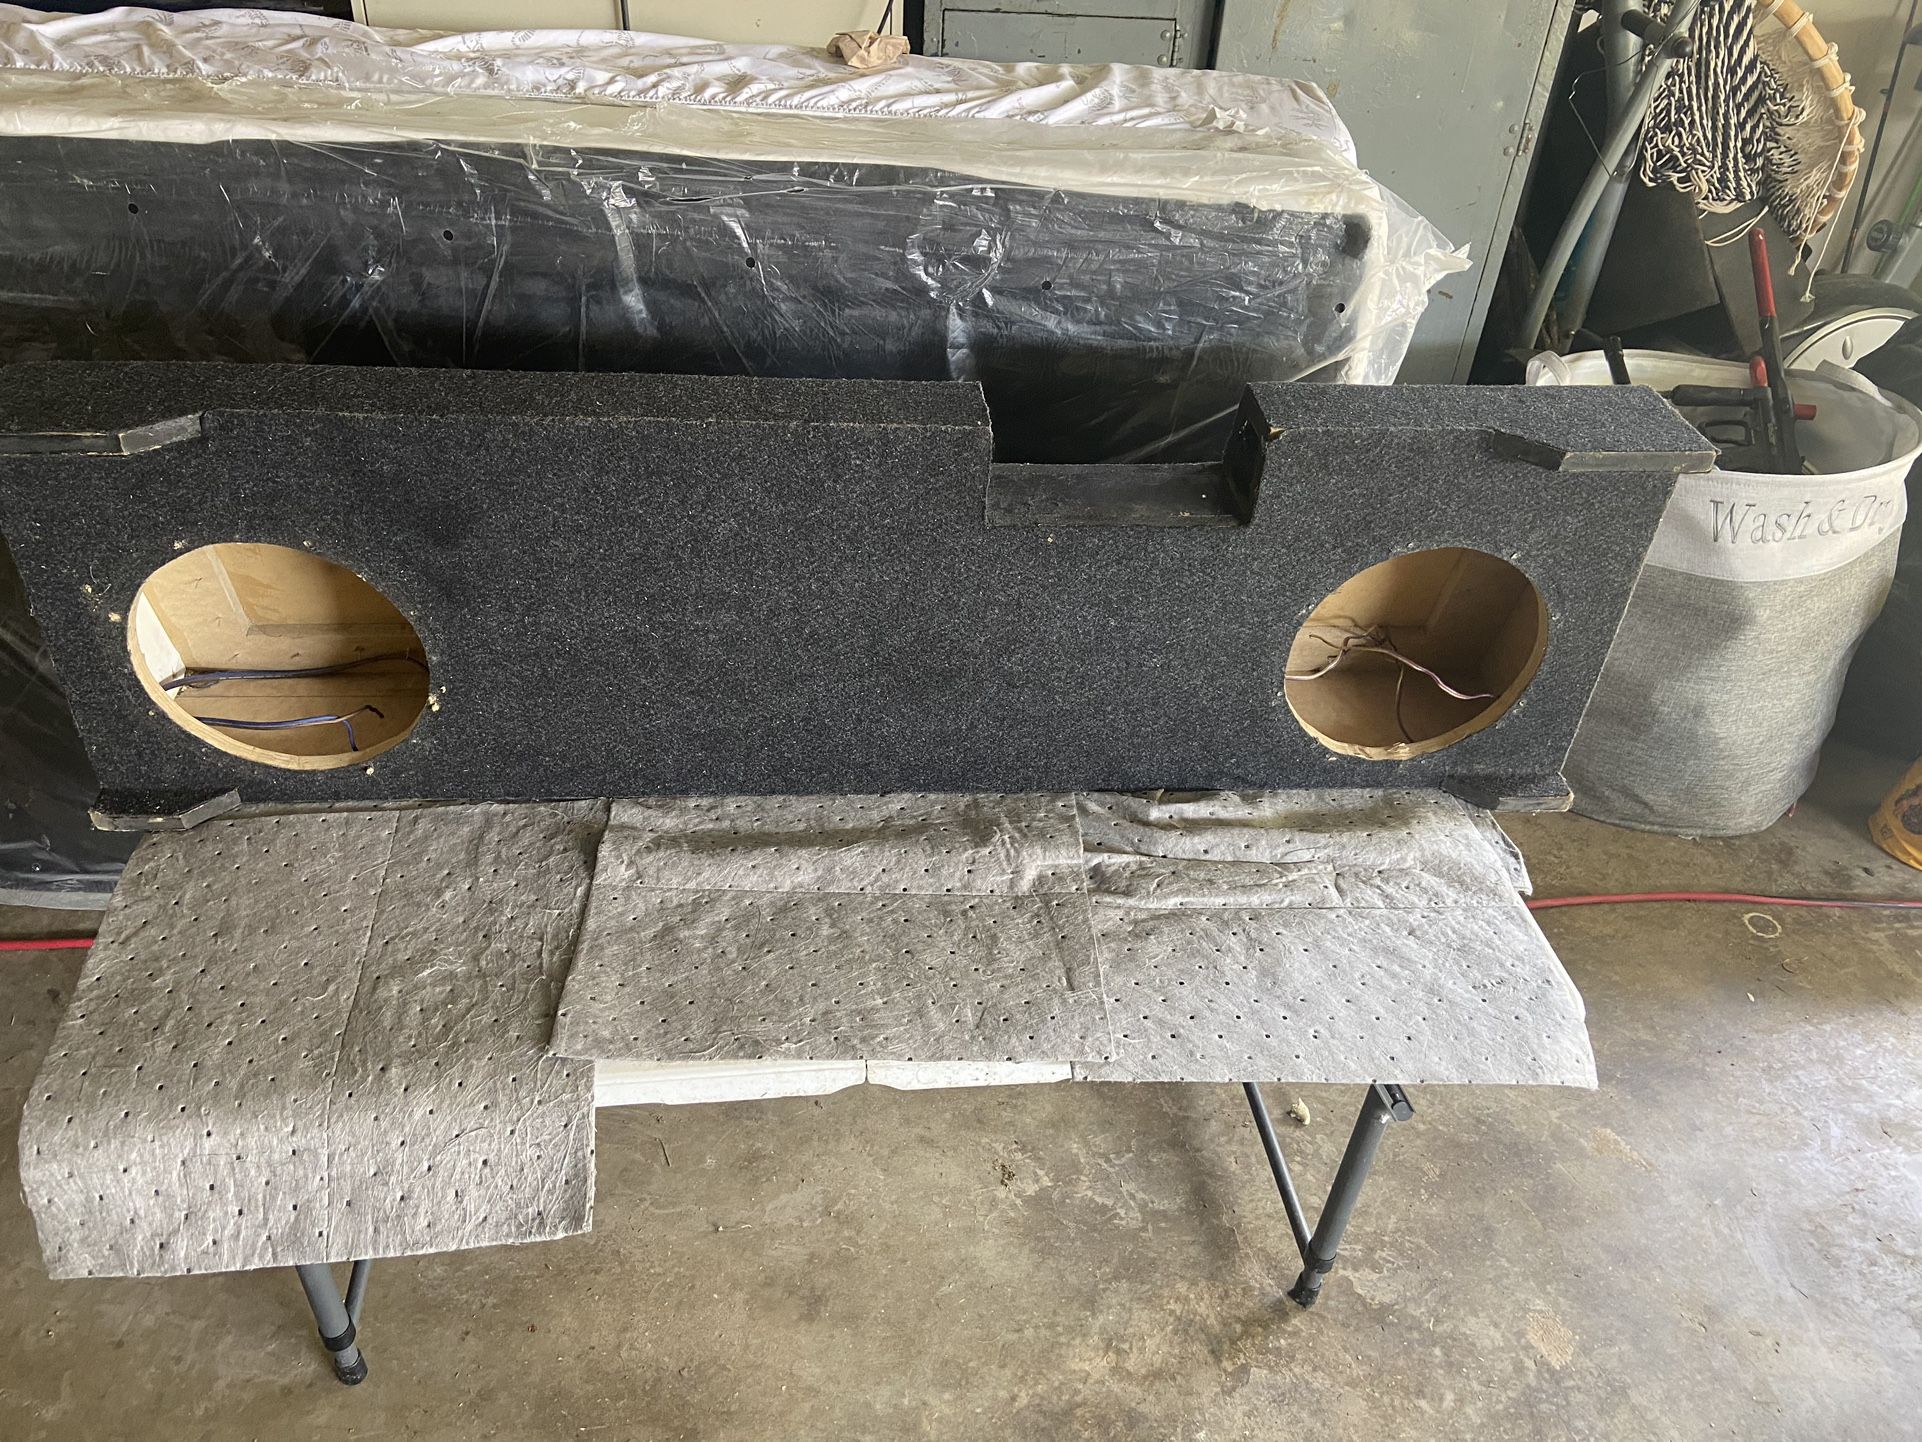 subwoofer box for 2 “10”